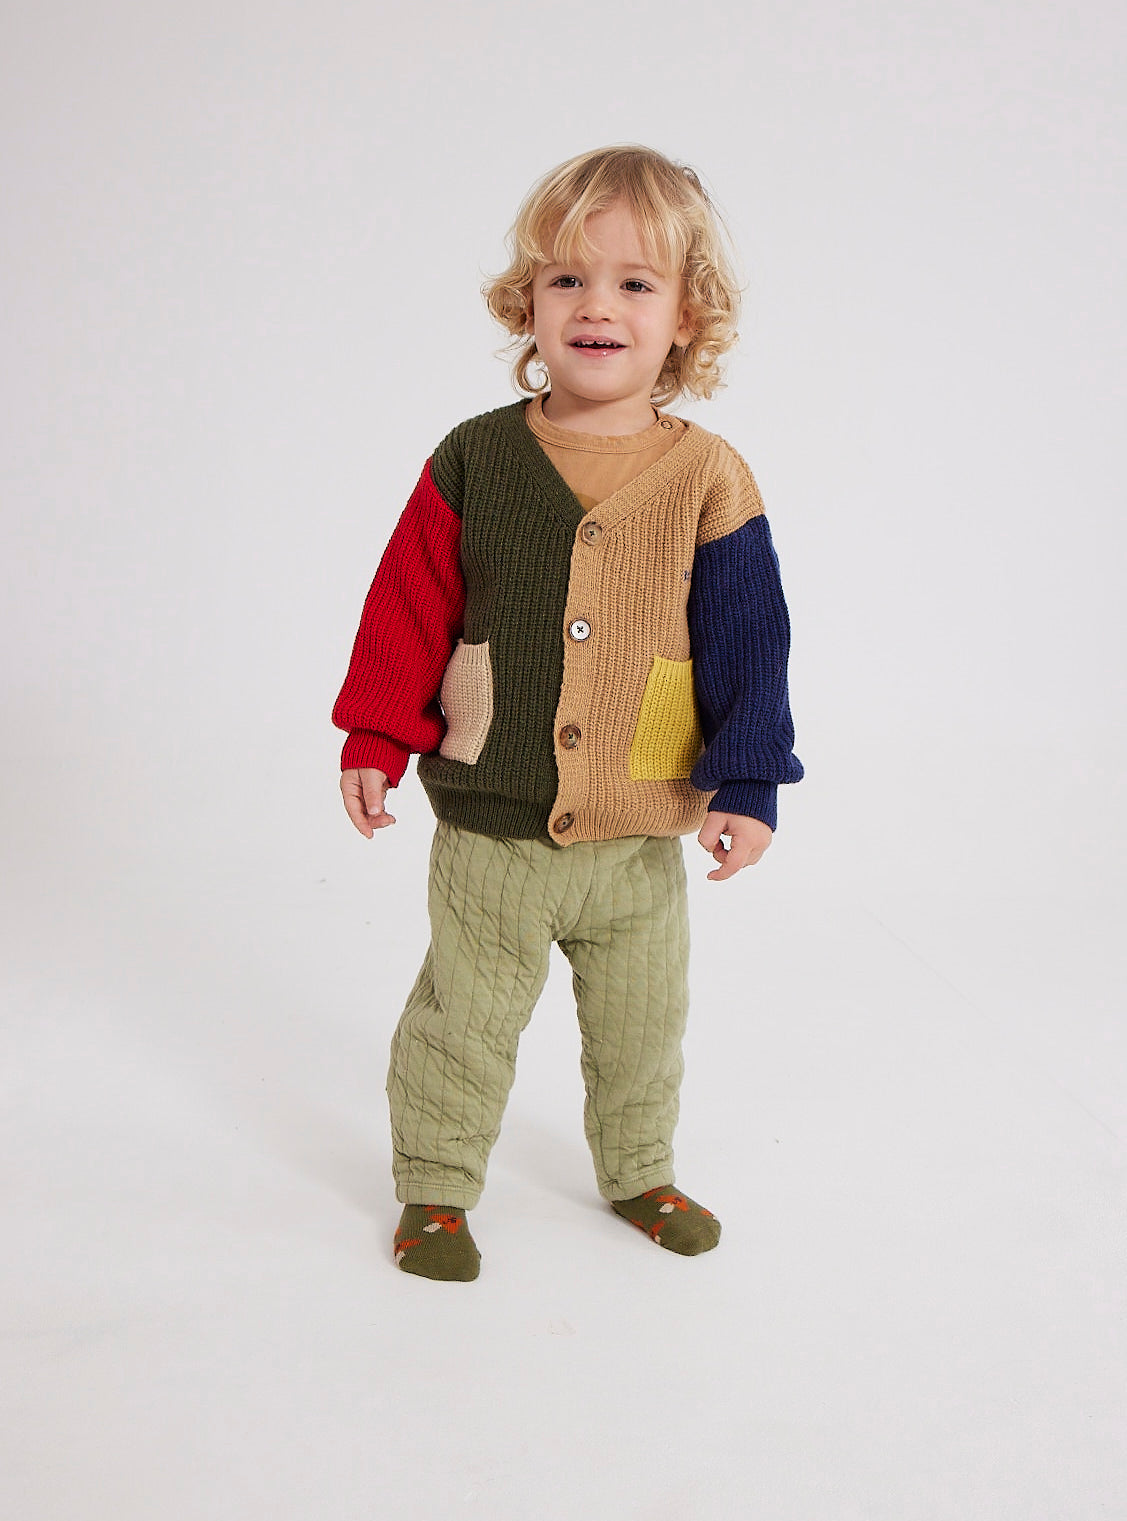 Baby Quilted Jogging Pants